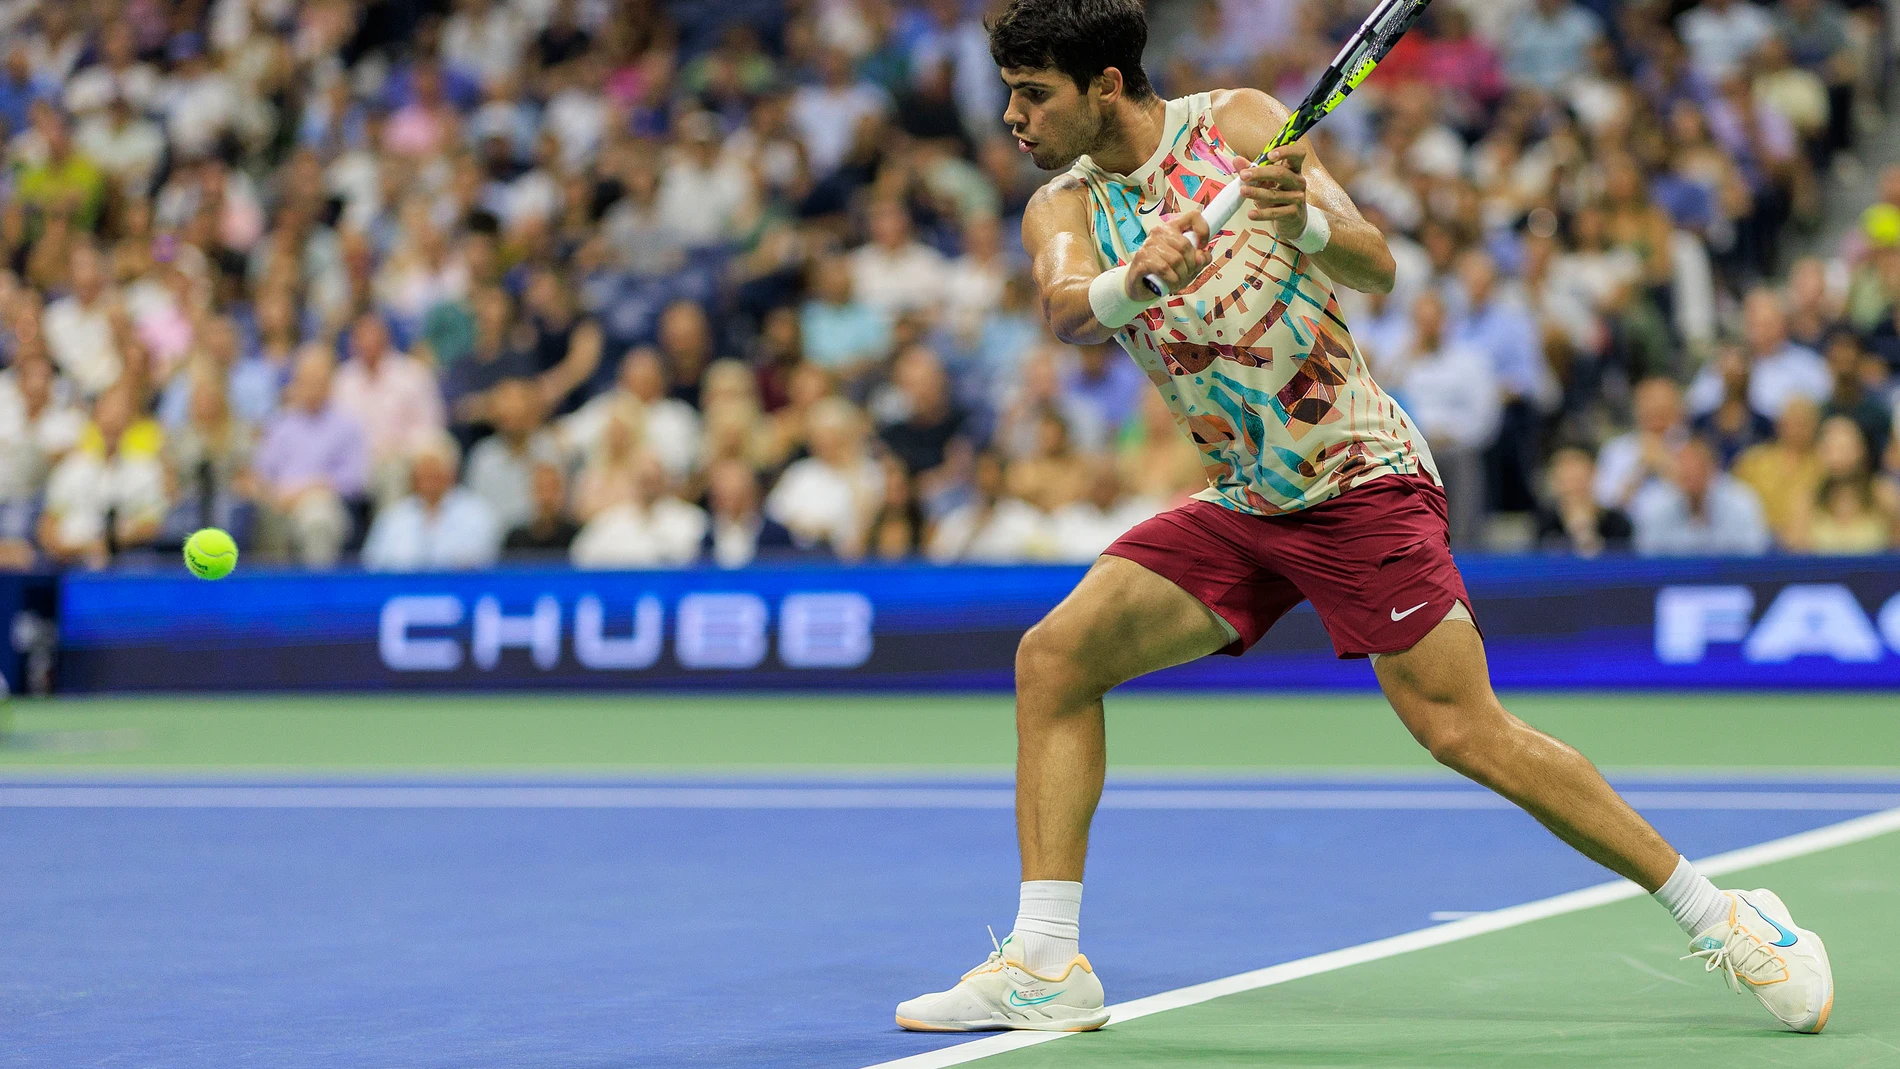 06 September 2023, US, Flushing: Spanish tennis player Carlos Alcaraz in action against Germany's Alexander Zverev during their Men's Singles Quarter-final match of the 2023 US Open at the USTA Billie Jean King National Tennis Center. Photo: Javier Rojas/PI via ZUMA Press Wire/dpa Javier Rojas/Pi Via Zuma Press W / Dpa 06/09/2023 ONLY FOR USE IN SPAIN